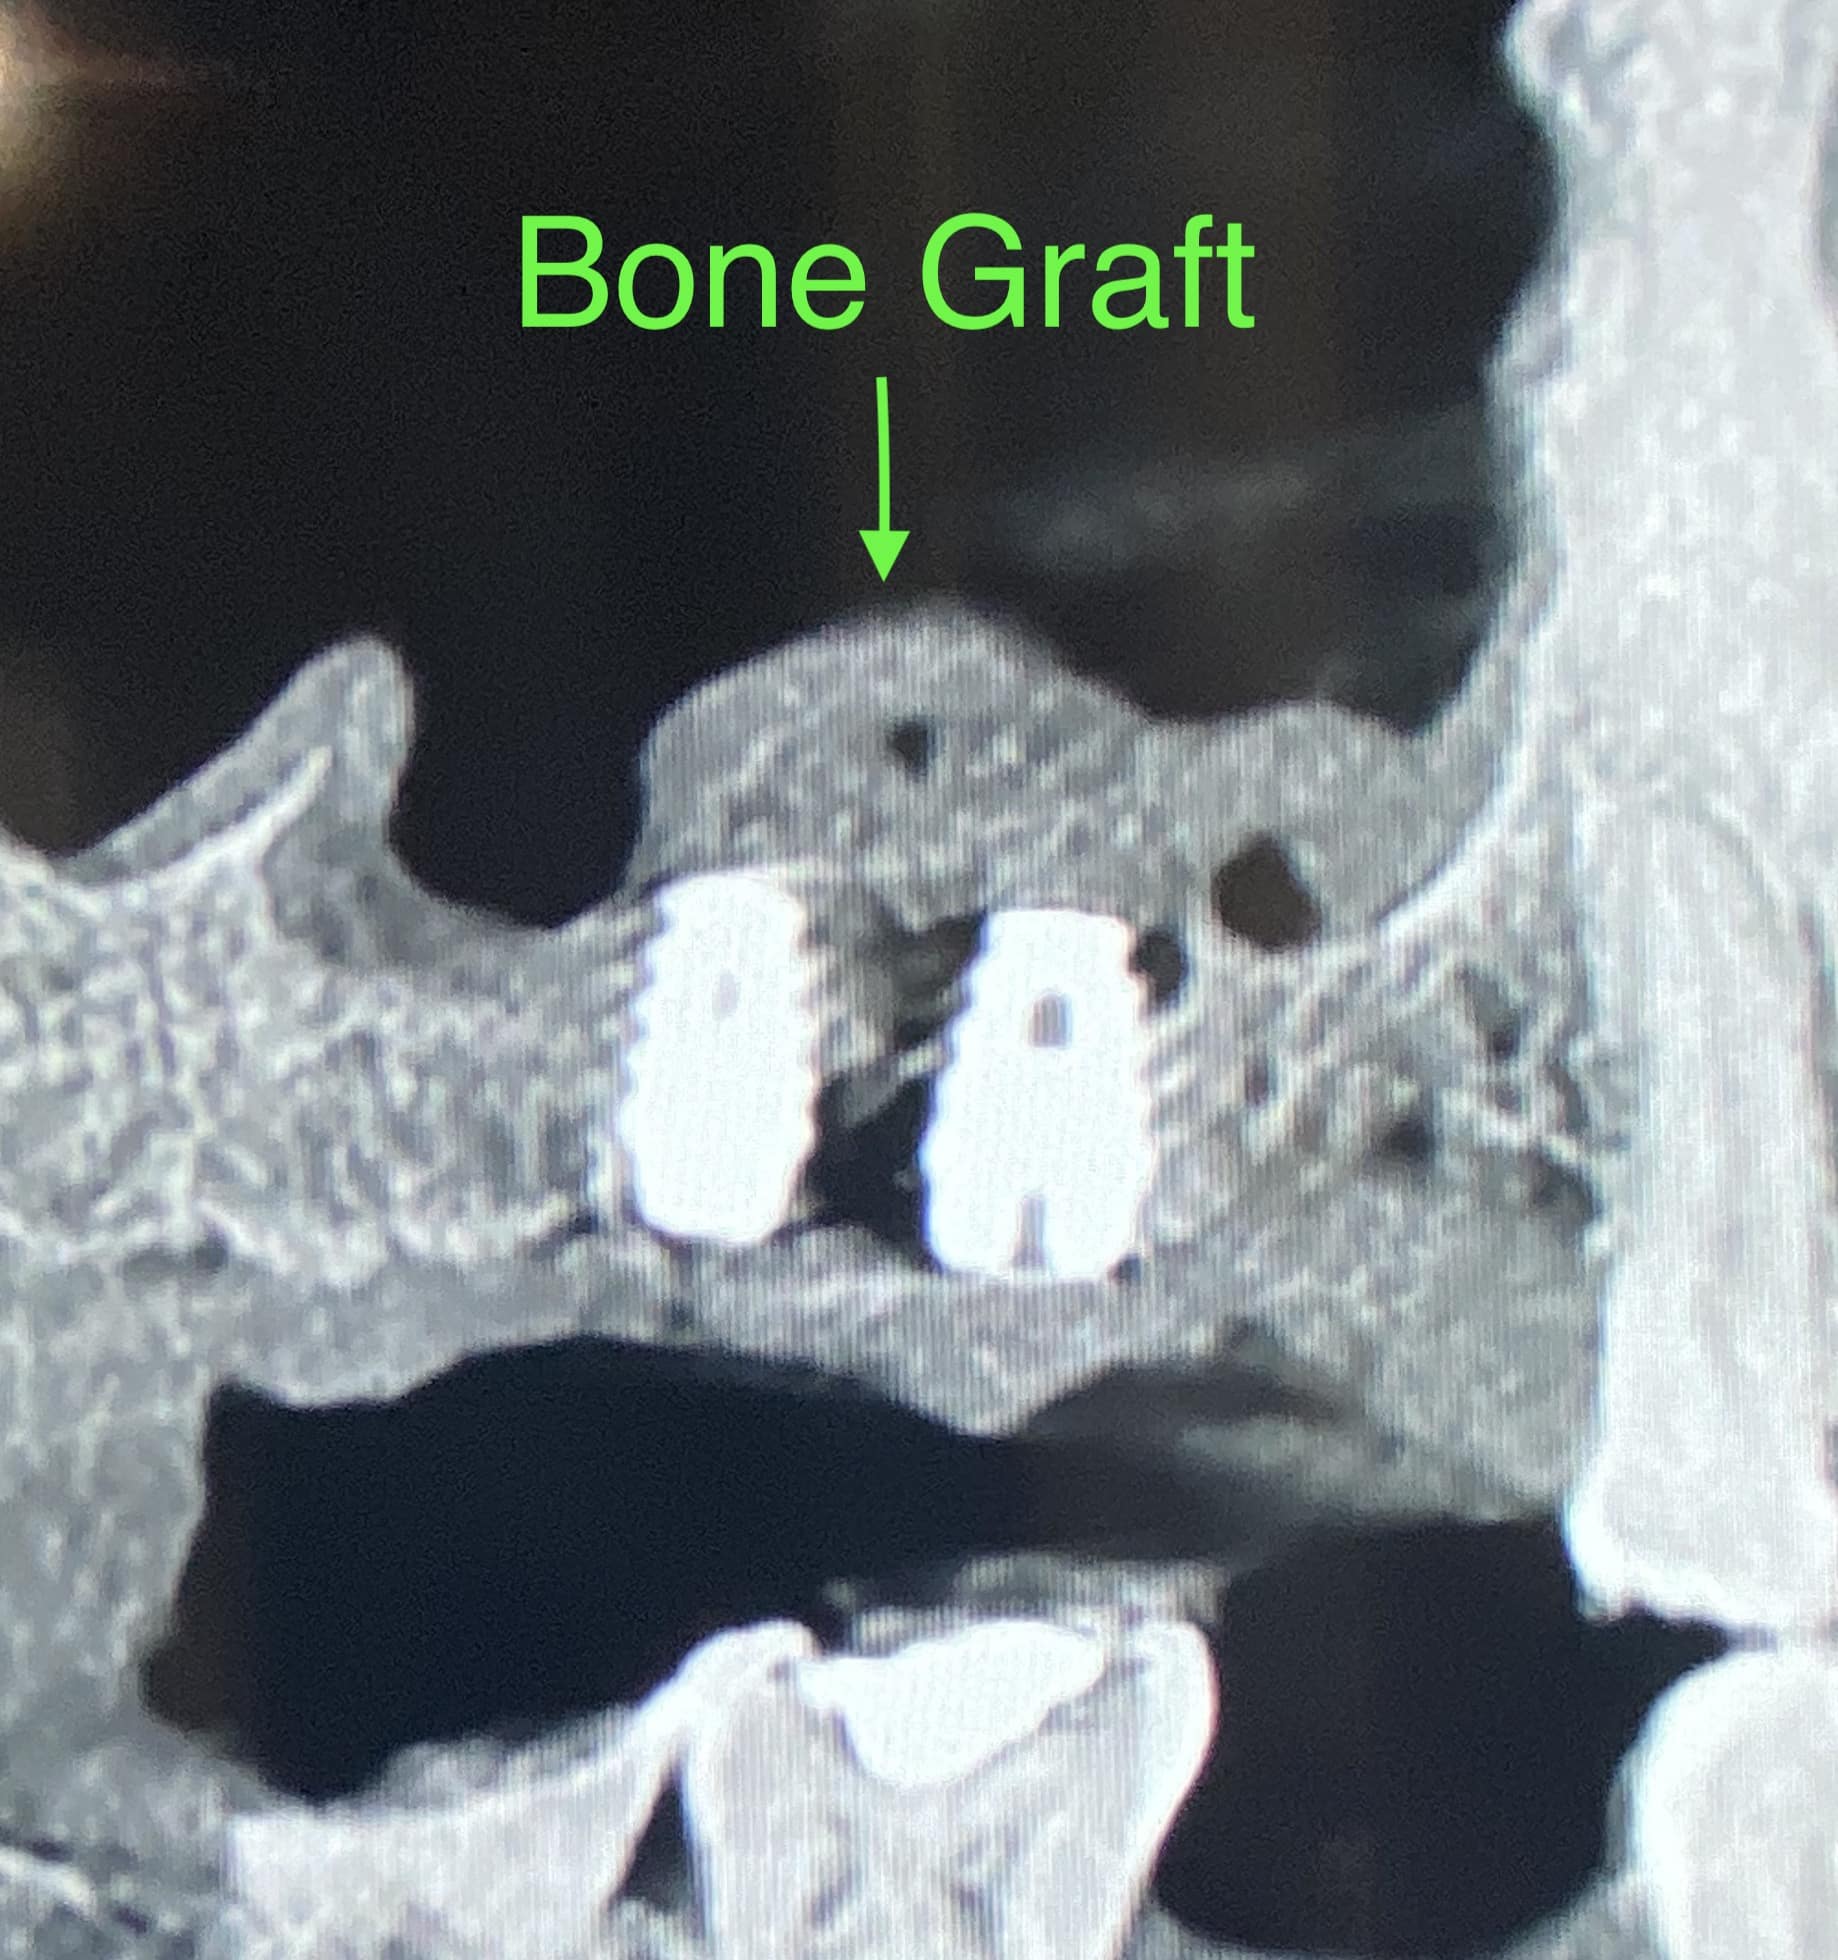 Sinus Lift via Lateral Window Approach with Bone Graft and Implant Placements